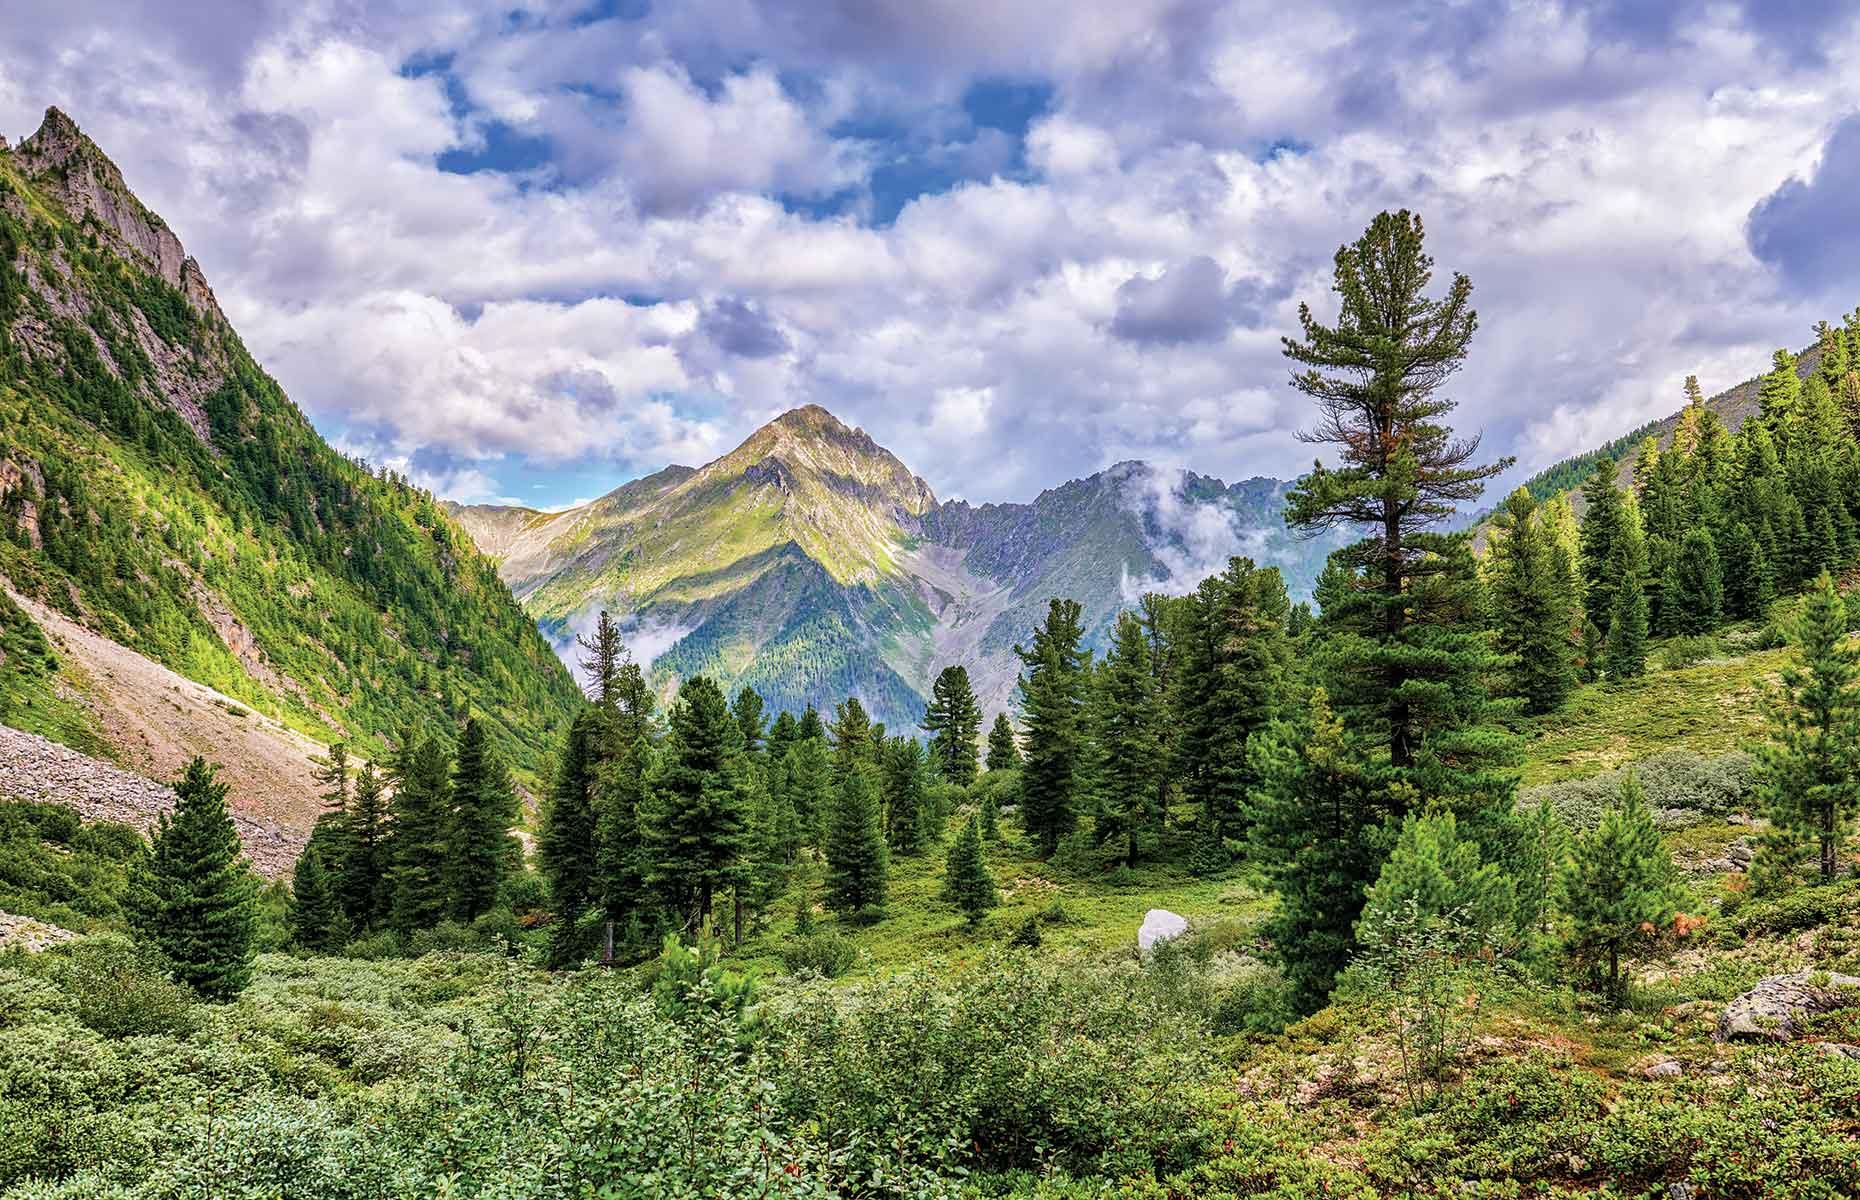 <p>A mountain range in the remote republic of Buryatia in southern Siberia, the Sayan once served as a border between Russia and Mongolia. Its trees include Siberian pines, pictured here. The Russian far north contains a quarter of the world’s trees. </p>